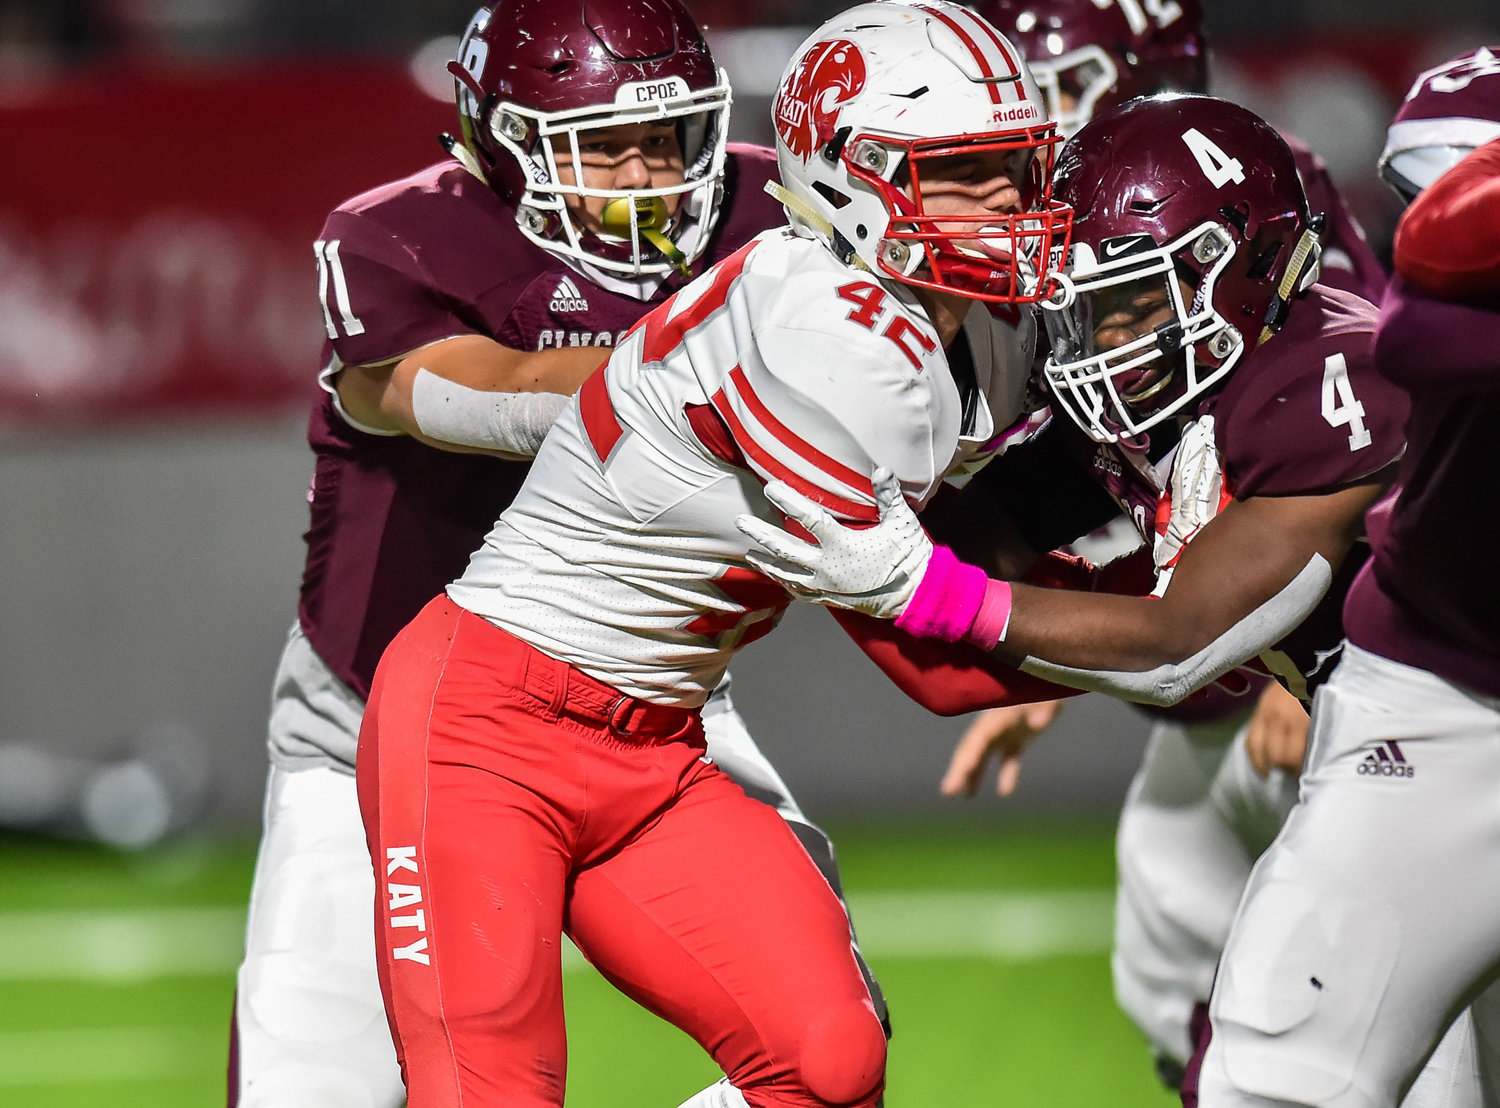 Katy, Tx. Oct. 25, 2019: Katy's Ty Kana (42) tries making his way around Cinco Ranch's GJ Kelly (4) during a conference game between Katy Tigers and Cinco Ranch Cougars at Legacy Stadium. (Photo by Mark Goodman / Katy Times)